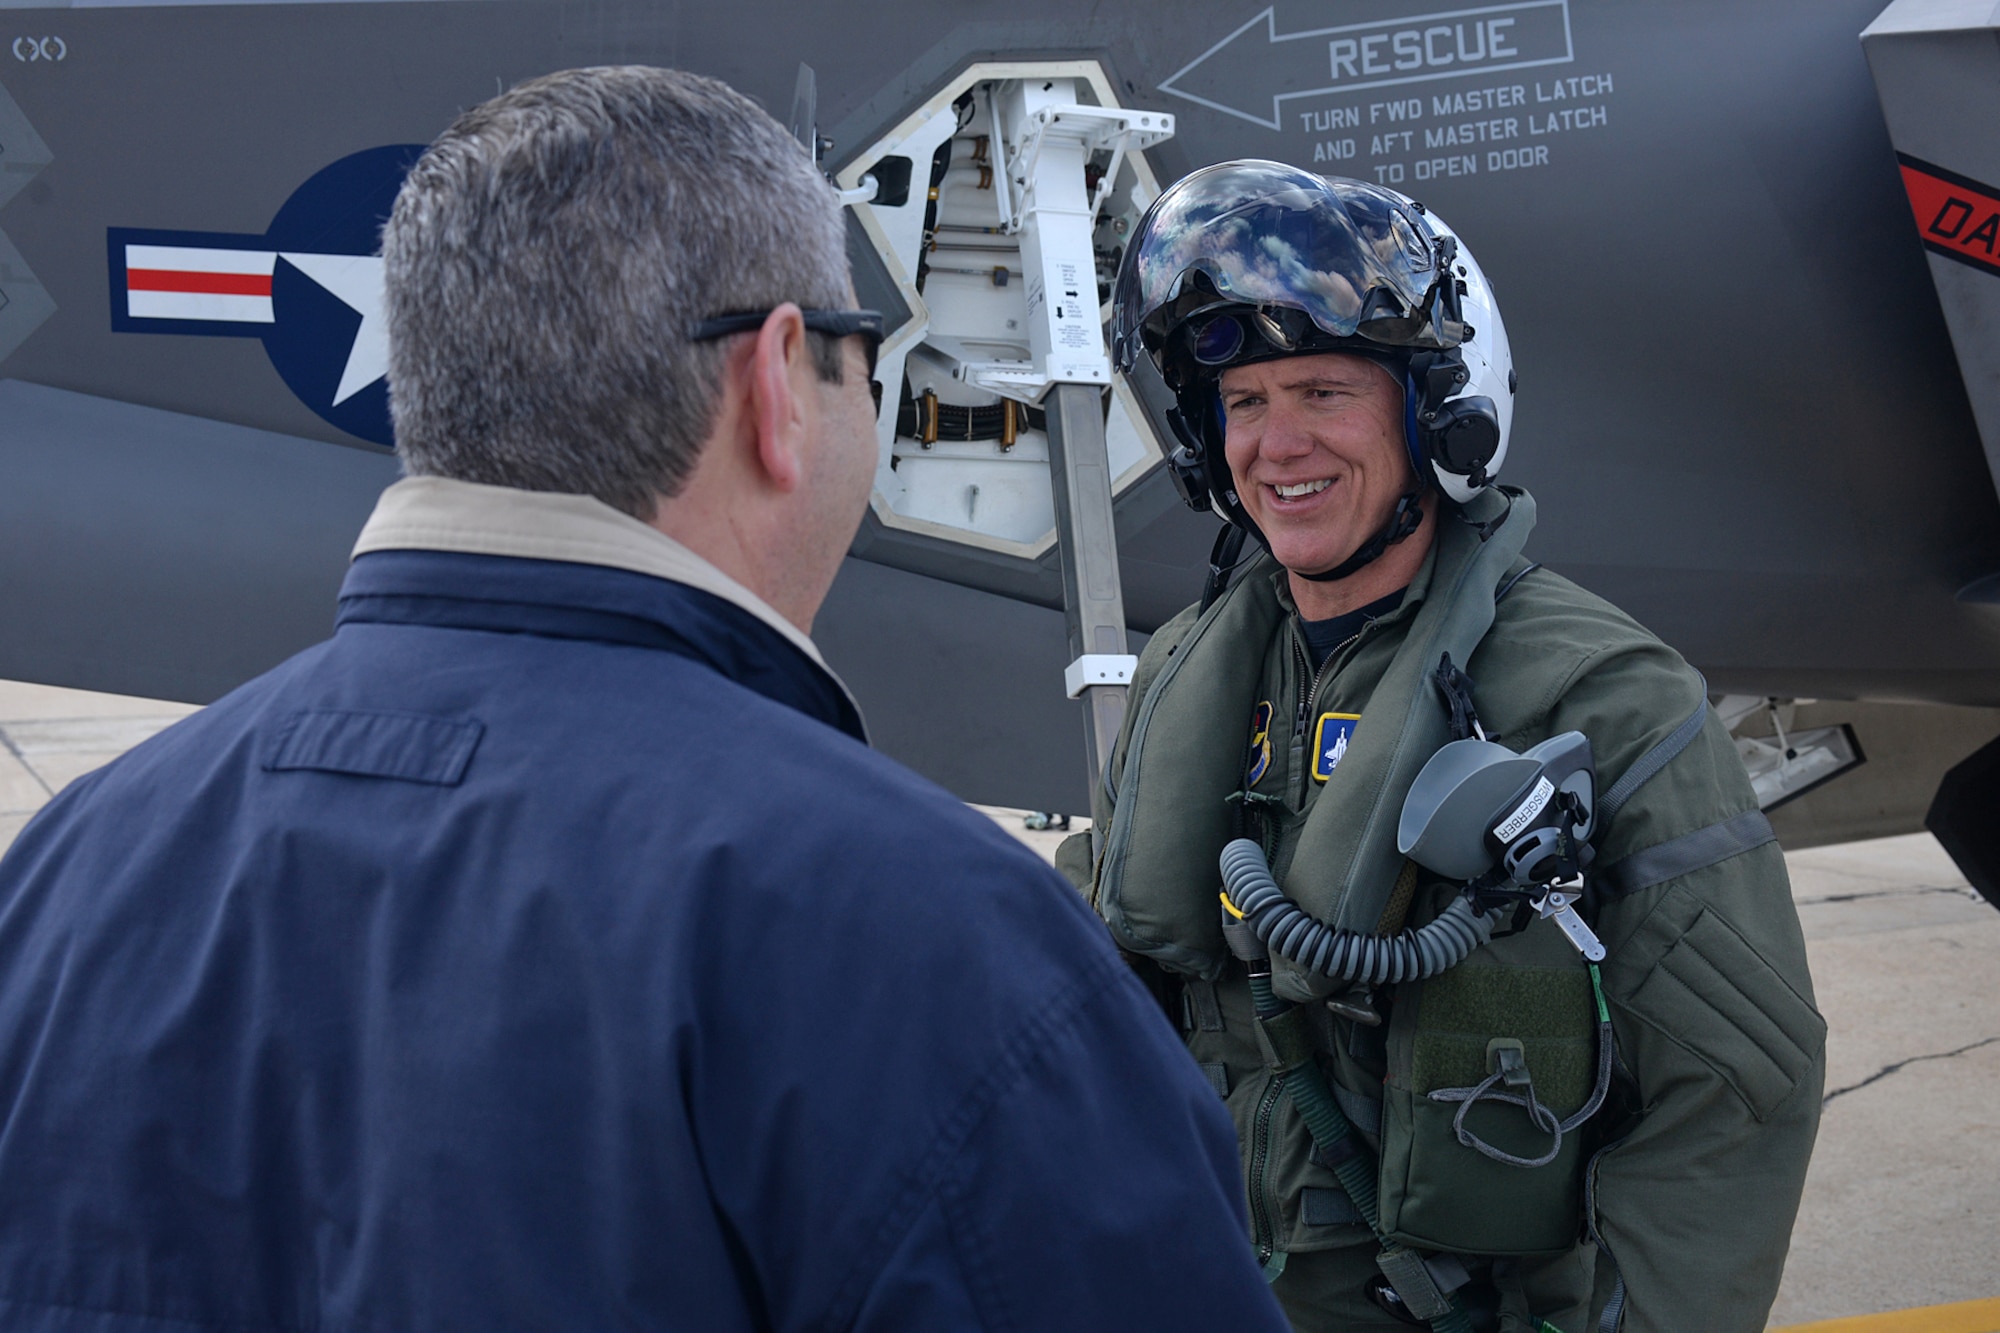 Navy Capt. Mark Weisgerber, the 33rd Fighter Wing vice commander, is greeted by Greg Hoffman, the 570th Aircraft Maintenance Squadron director, at Hill Air Force Base, Utah, April 15, 2016. Weisgerber flew an F-35C Lightning II to the base where it will be modified at the Ogden Air Logistics Complex. The complex is the first to work on the entire fleet of F-35 variants, which also includes the Air Force’s F-35A model and the Marine Corps’ F-35B model. (U.S. Air Force photo/Alex R. Lloyd)